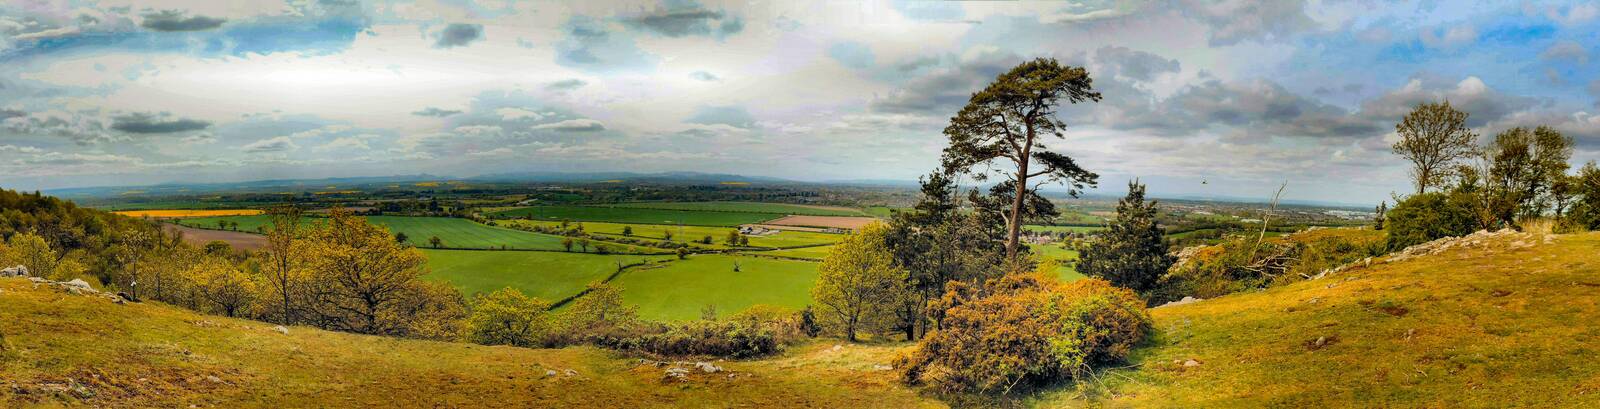 Image of Haughmond Hill by John Cooling